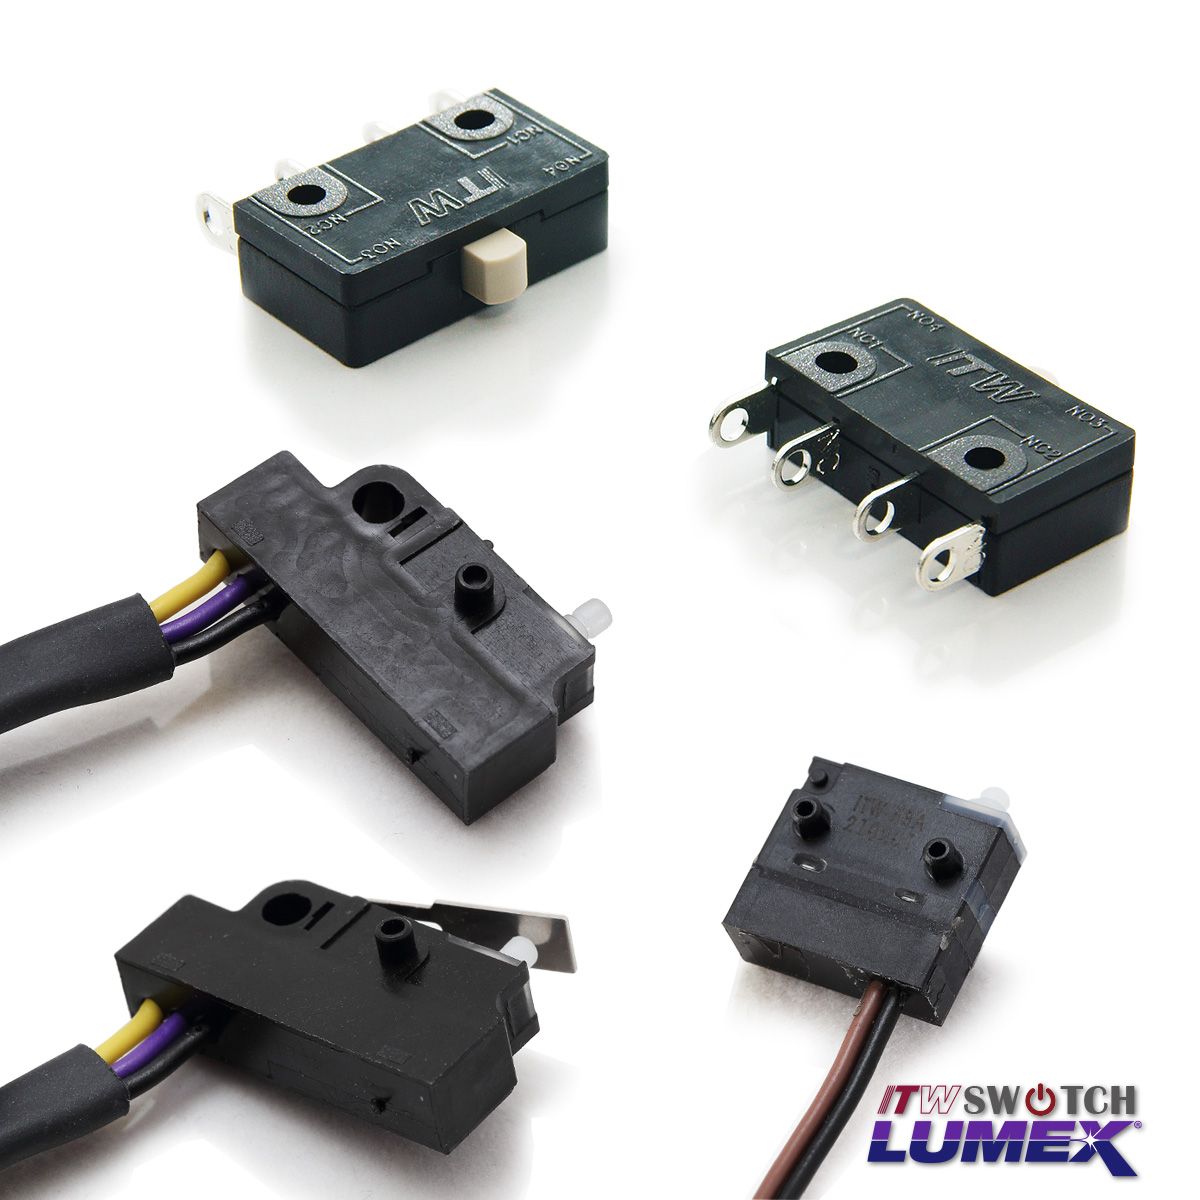 ITW Lumex Switch provides Micro Switches as part of its product offerings.